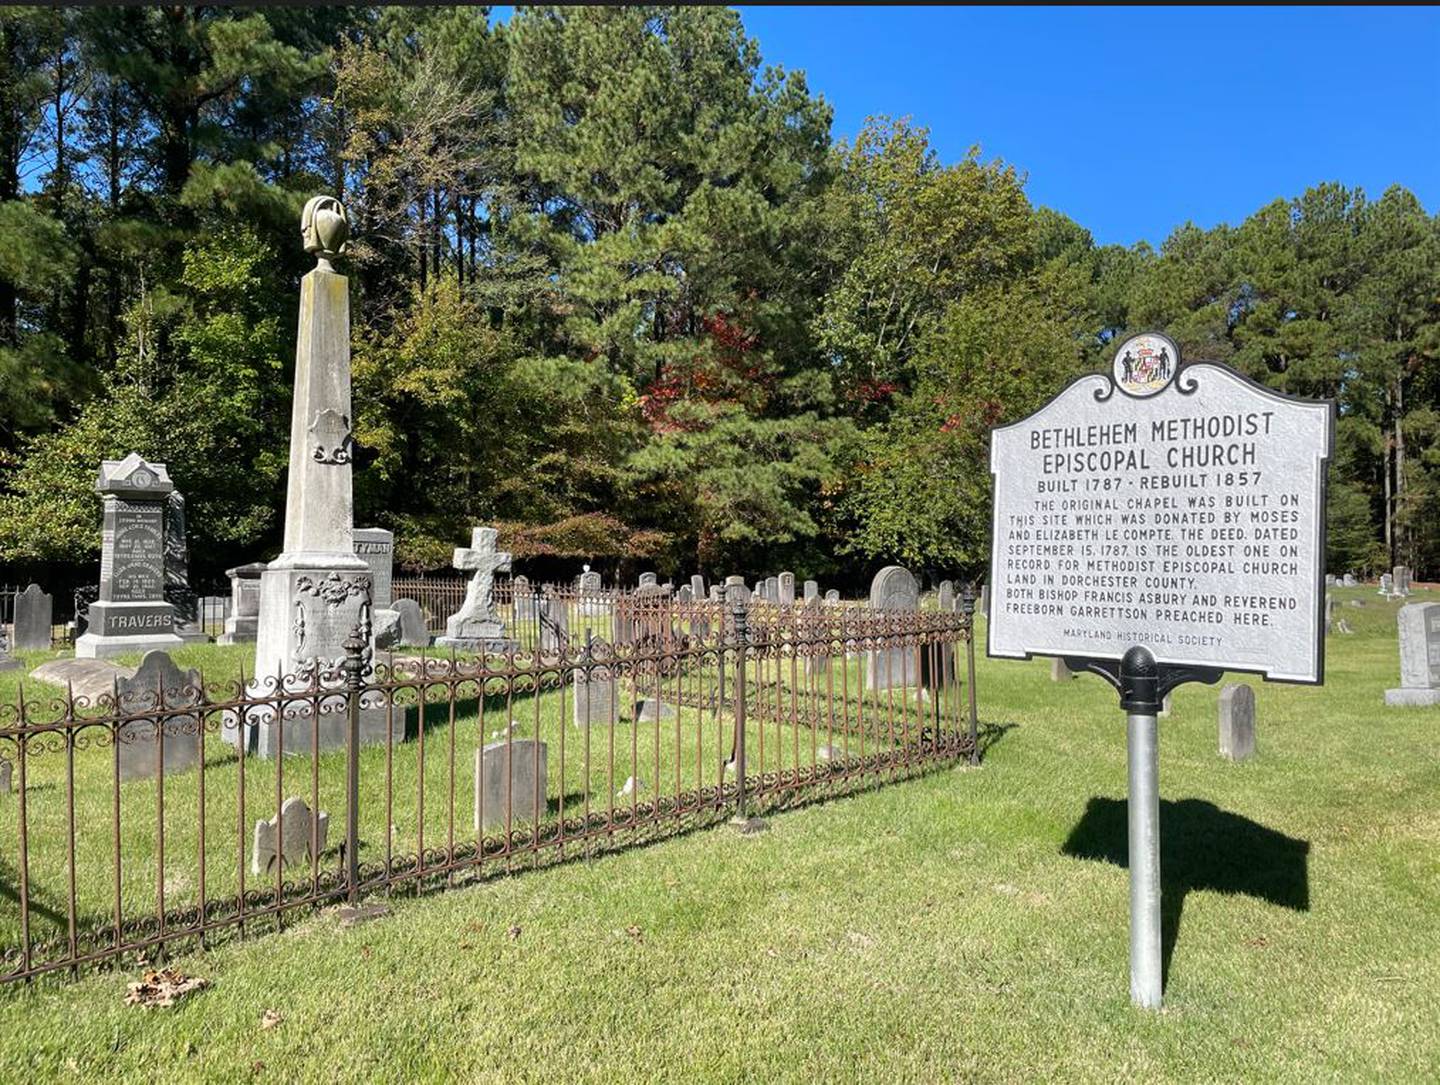 At Bethlehem Methodist Episcopal Church on Taylor’s Island, an MDOT sign notes that it was the oldest Methodist Episcopal Church in Dorchester County. Left unsaid is anything about the church that stood behind Bethlehem for decades, until it burned down, nor the Black cemetery still there.